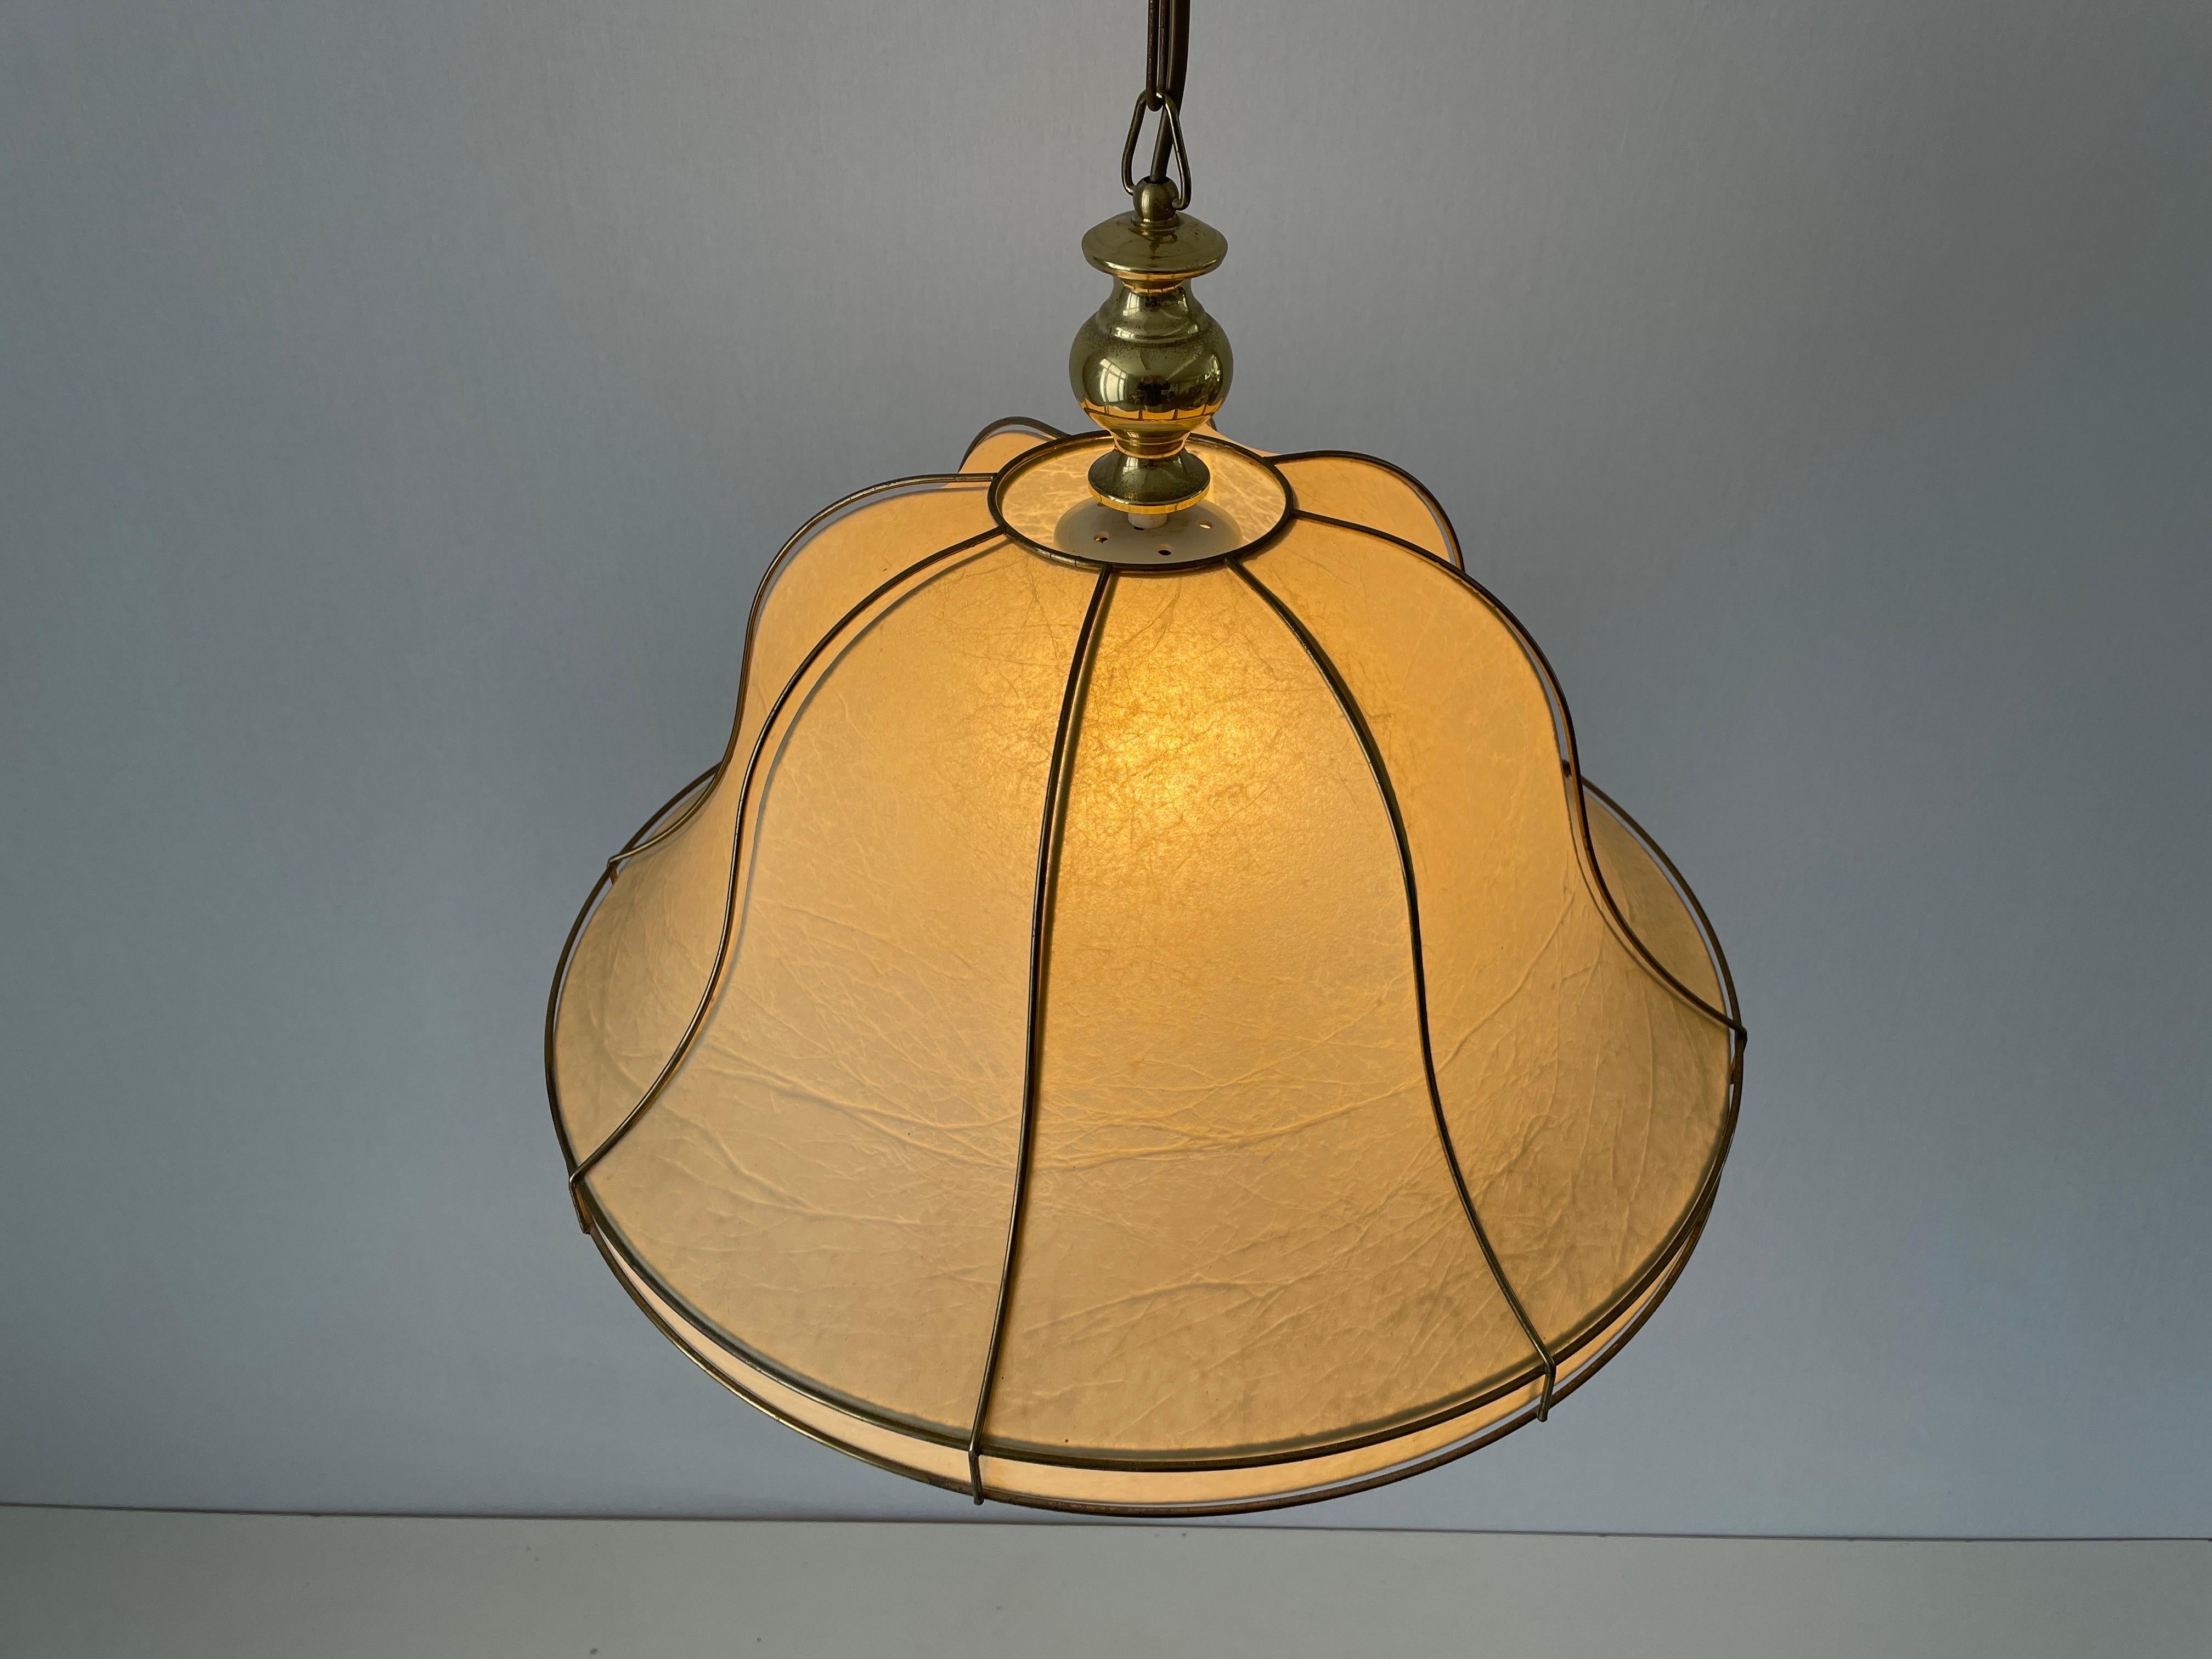 Cocoon Pendant Lamp with Gold Metal Shade Frame by Goldkant, 1960s, Germany For Sale 4